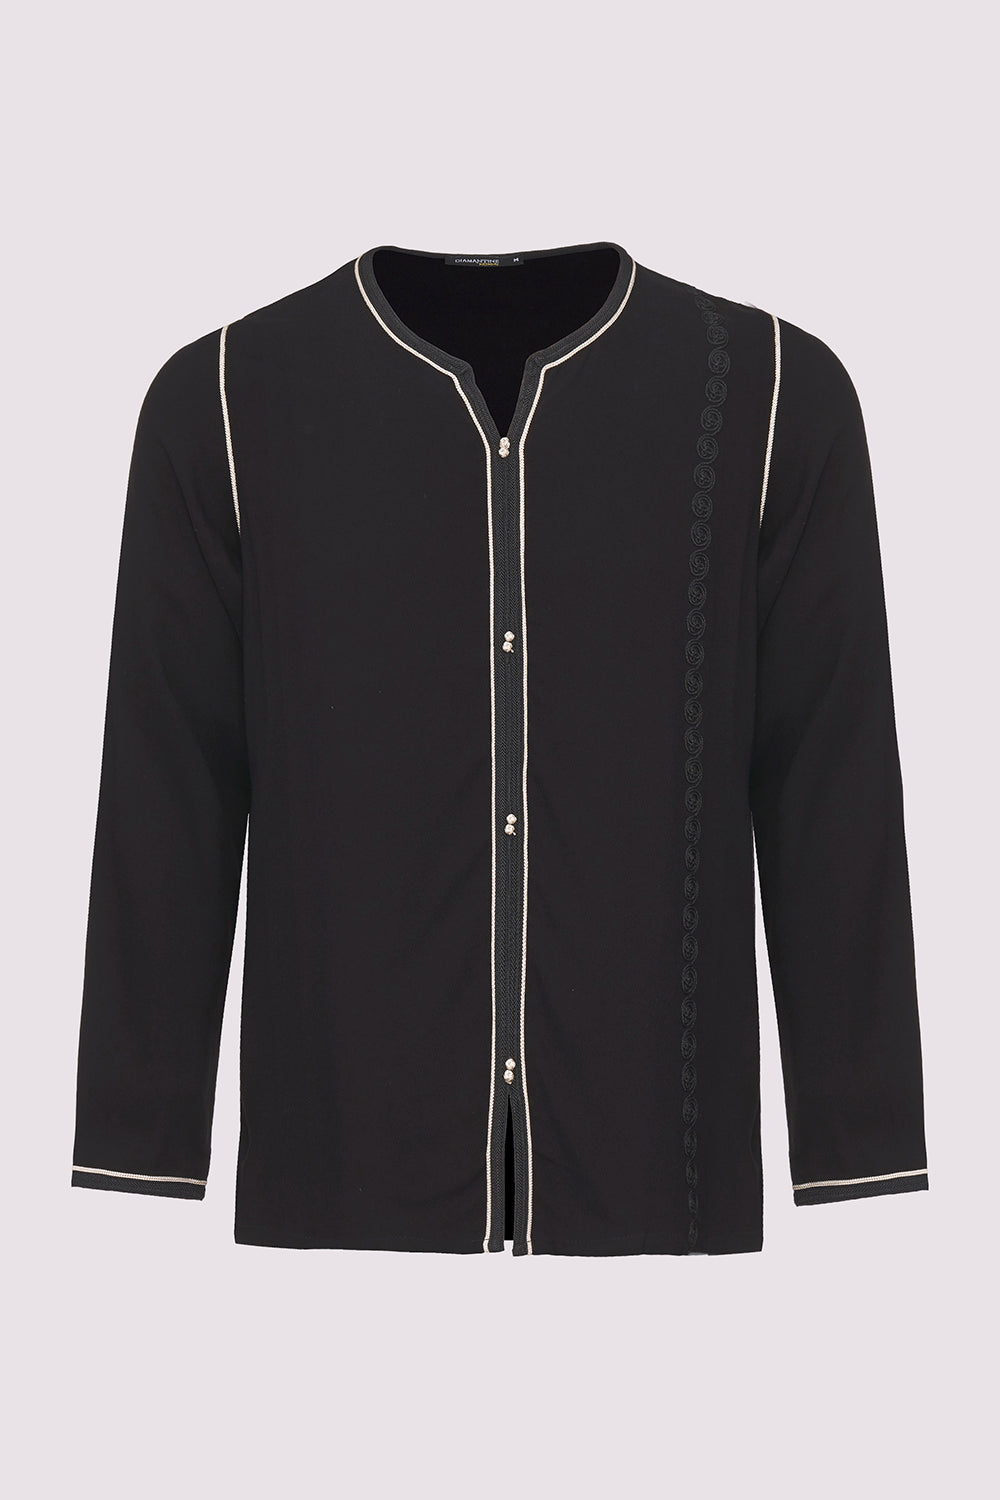 Houssni Embroidered Collarless Men's Button-Up Shirt in Black